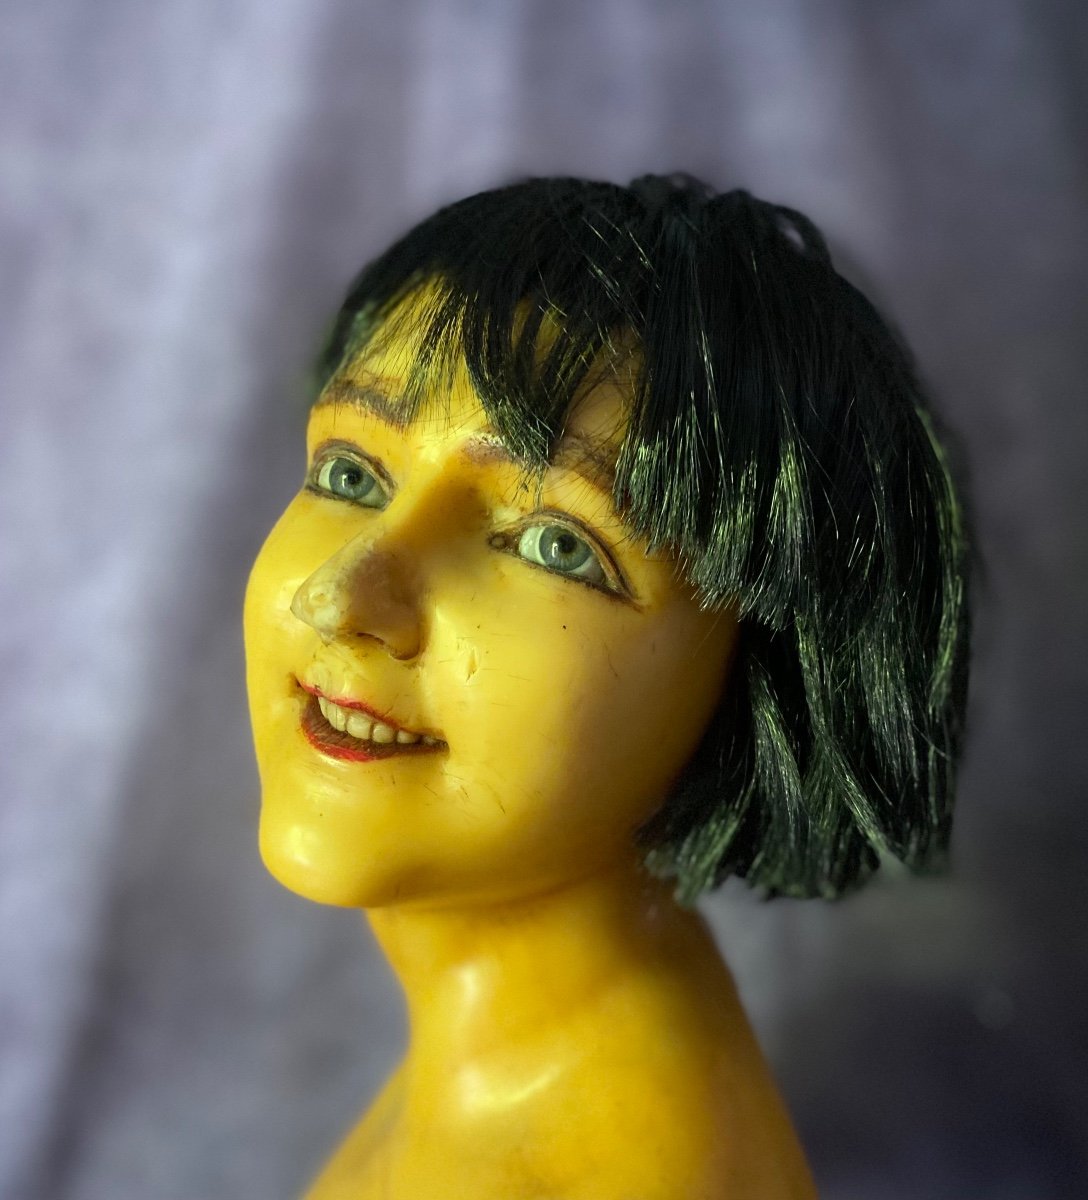 Wax Bust For Display Of Wigs, Lingerie And Bijoux - France Early 1900s -